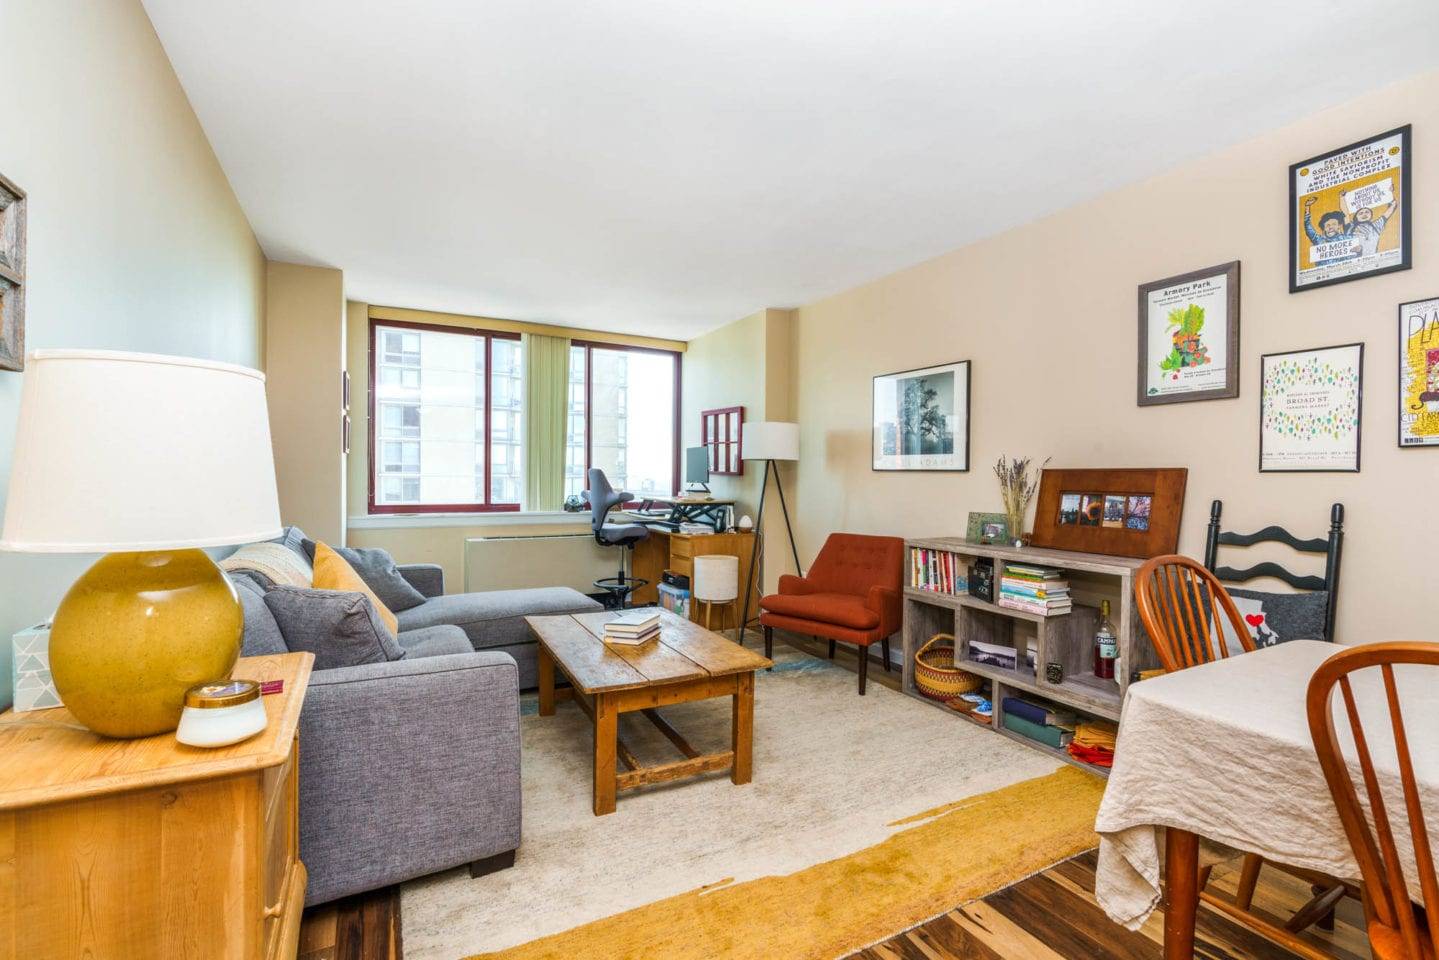 LONG ISLAND CITY ROOMY 1 BEDROOM IN THE SKYWELCOME HOME TO LONG ISLAND CITY !